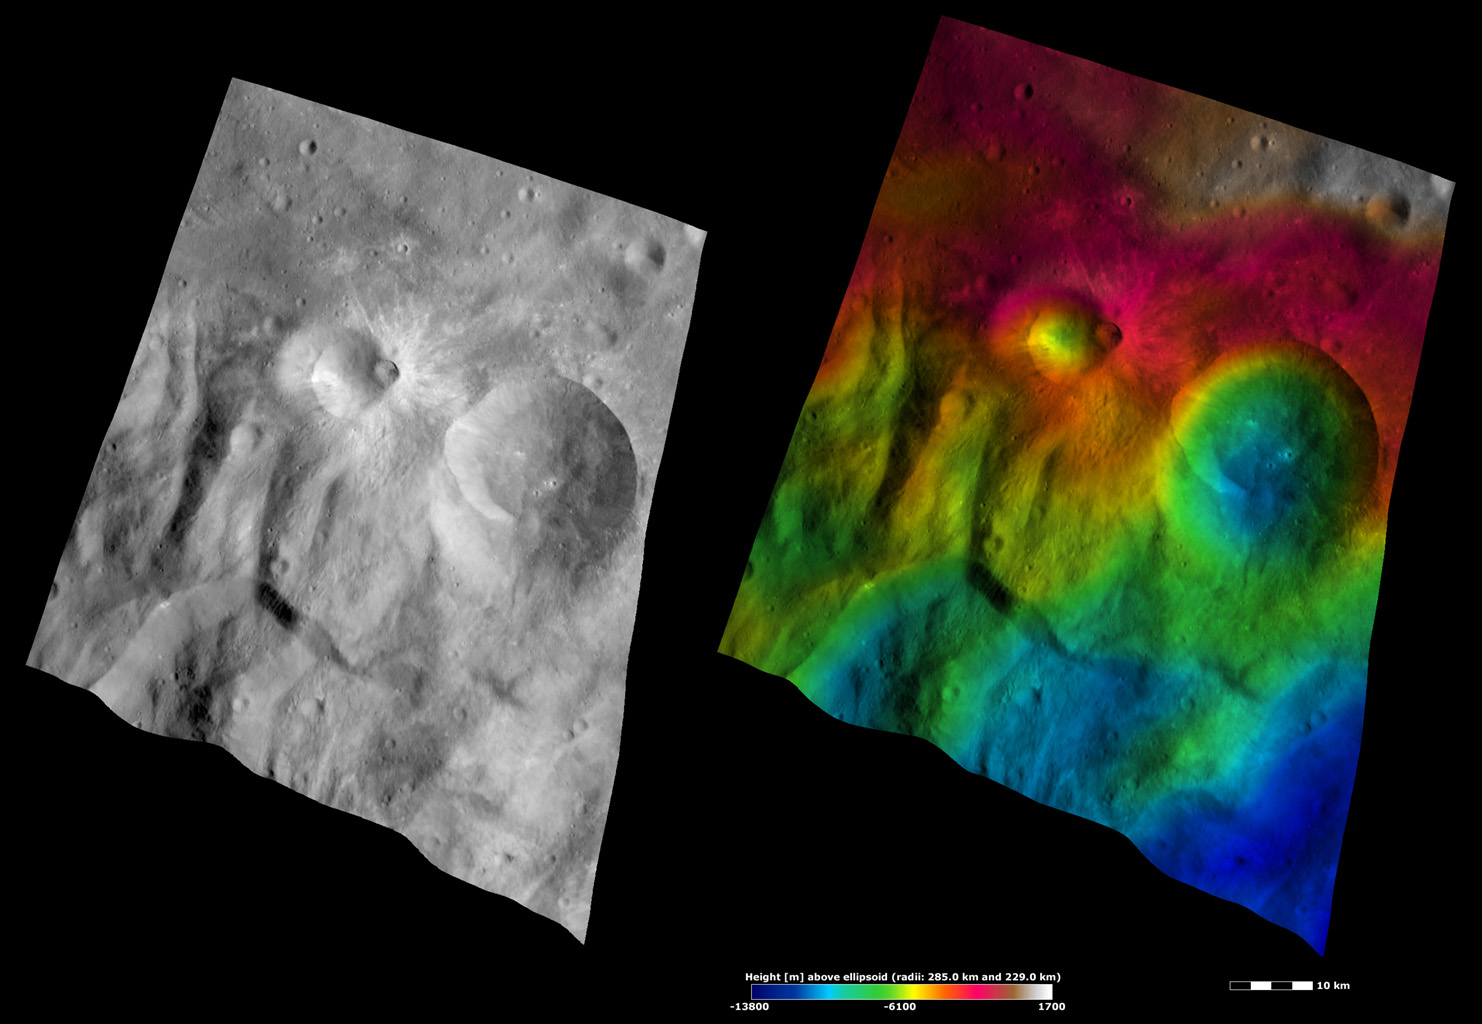 Apparent Brightness and Topography Images of Tuccia and Eusebia Craters